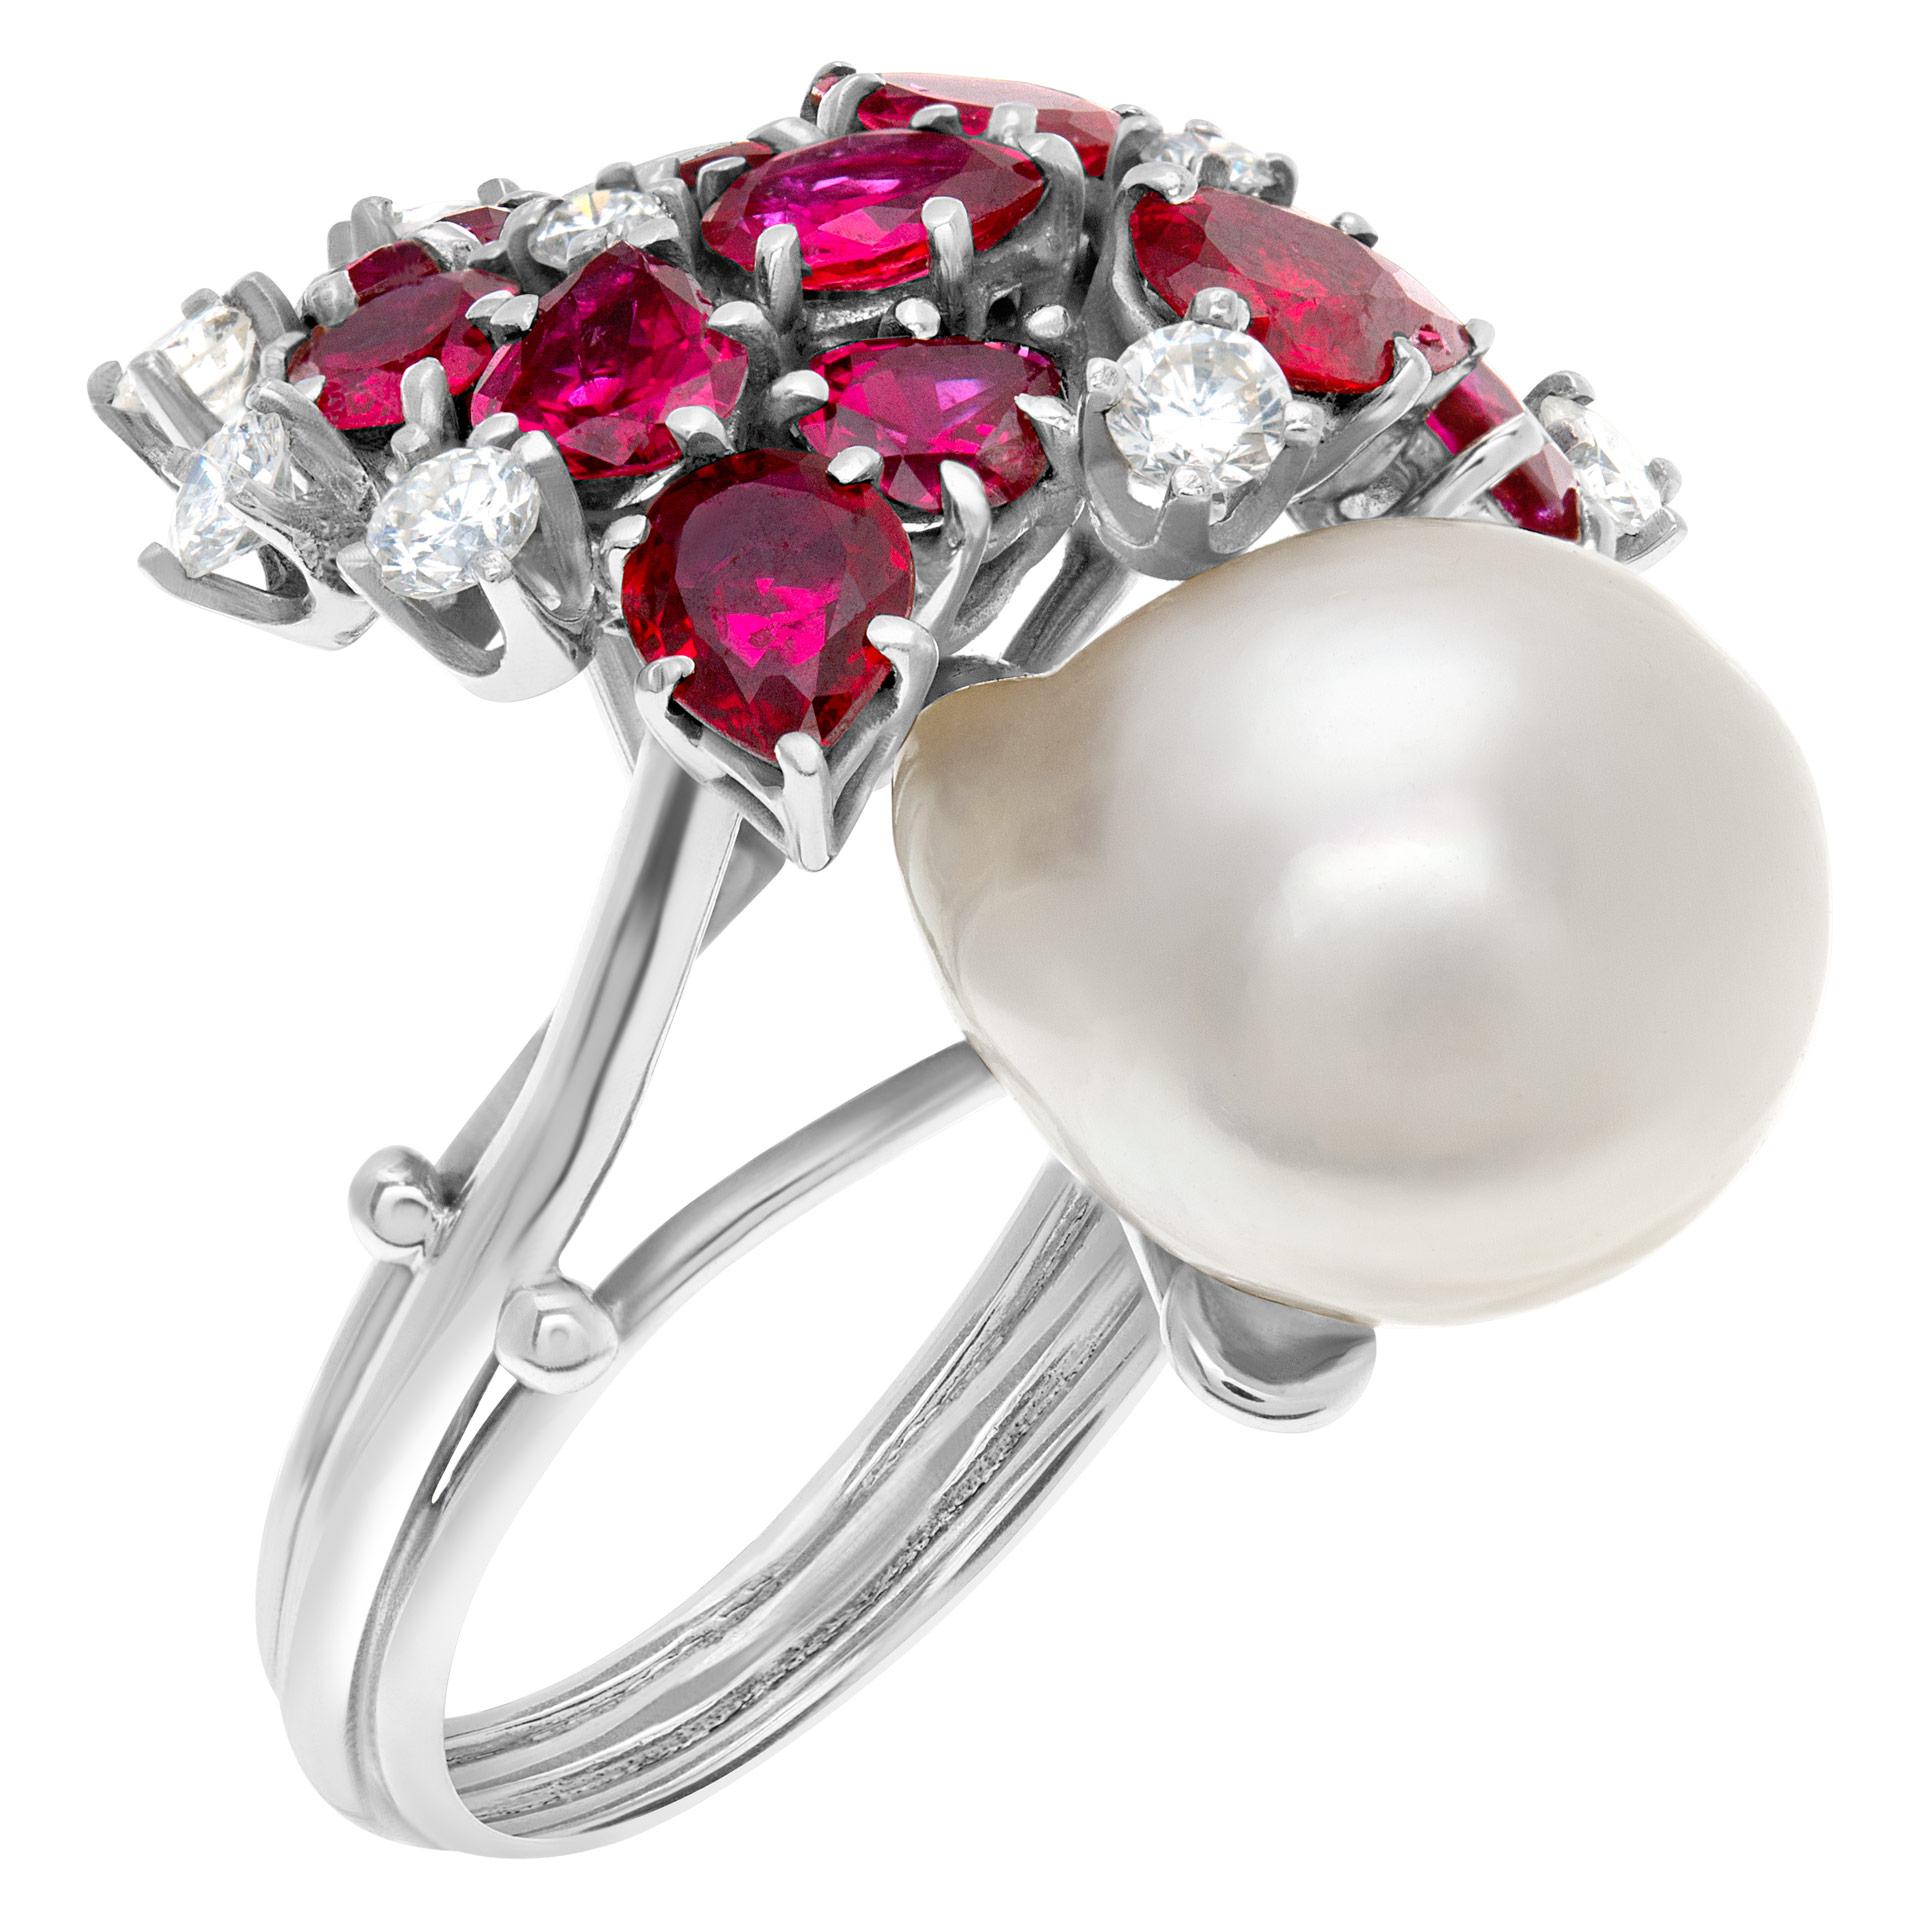 Baroque Style South Sea Pearl Ring with Multi Cut Rubies & Round For Sale